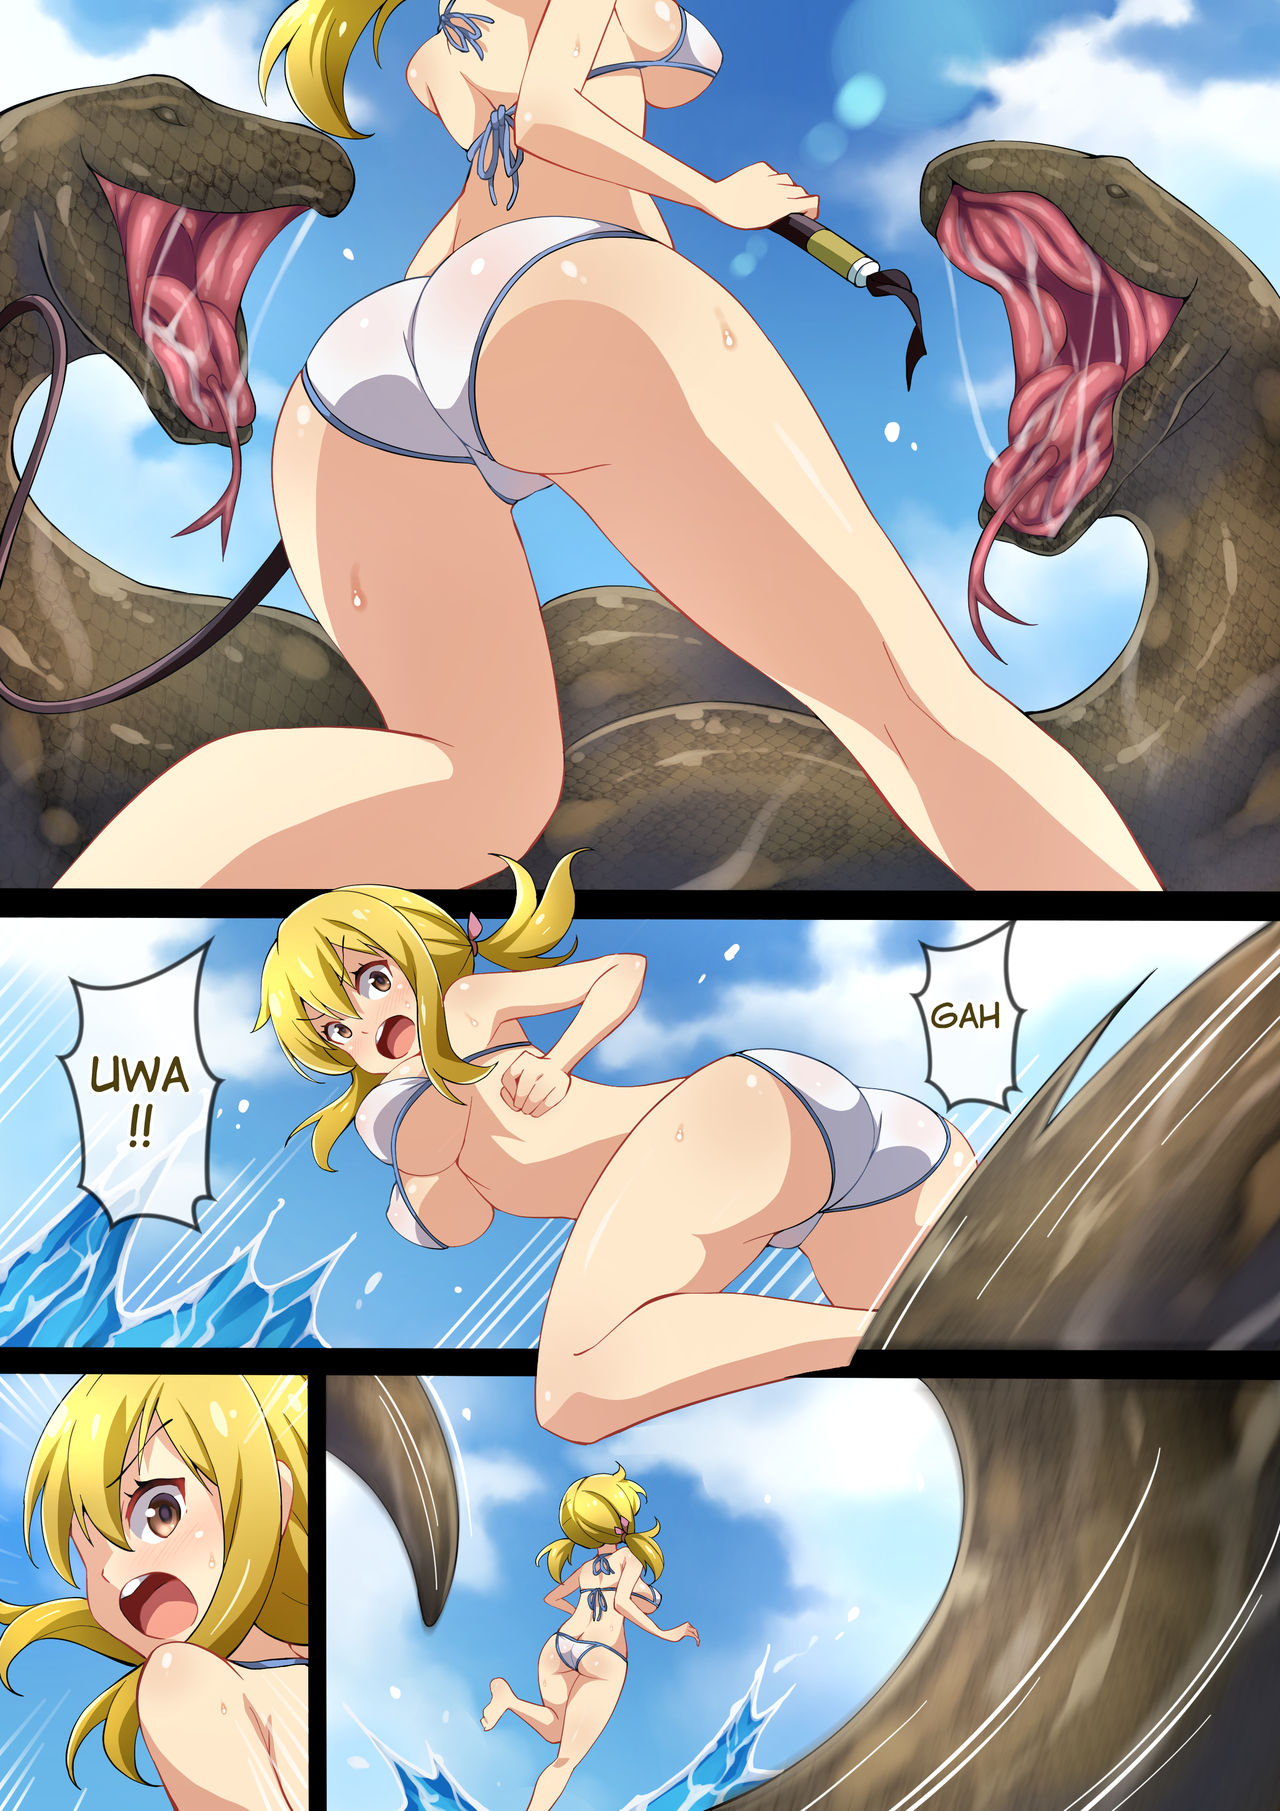 [Mist Night (Co_Ma)] Hell of Swallowed Quest Fail Lucy (Fairy Tail) [English] page 2 full